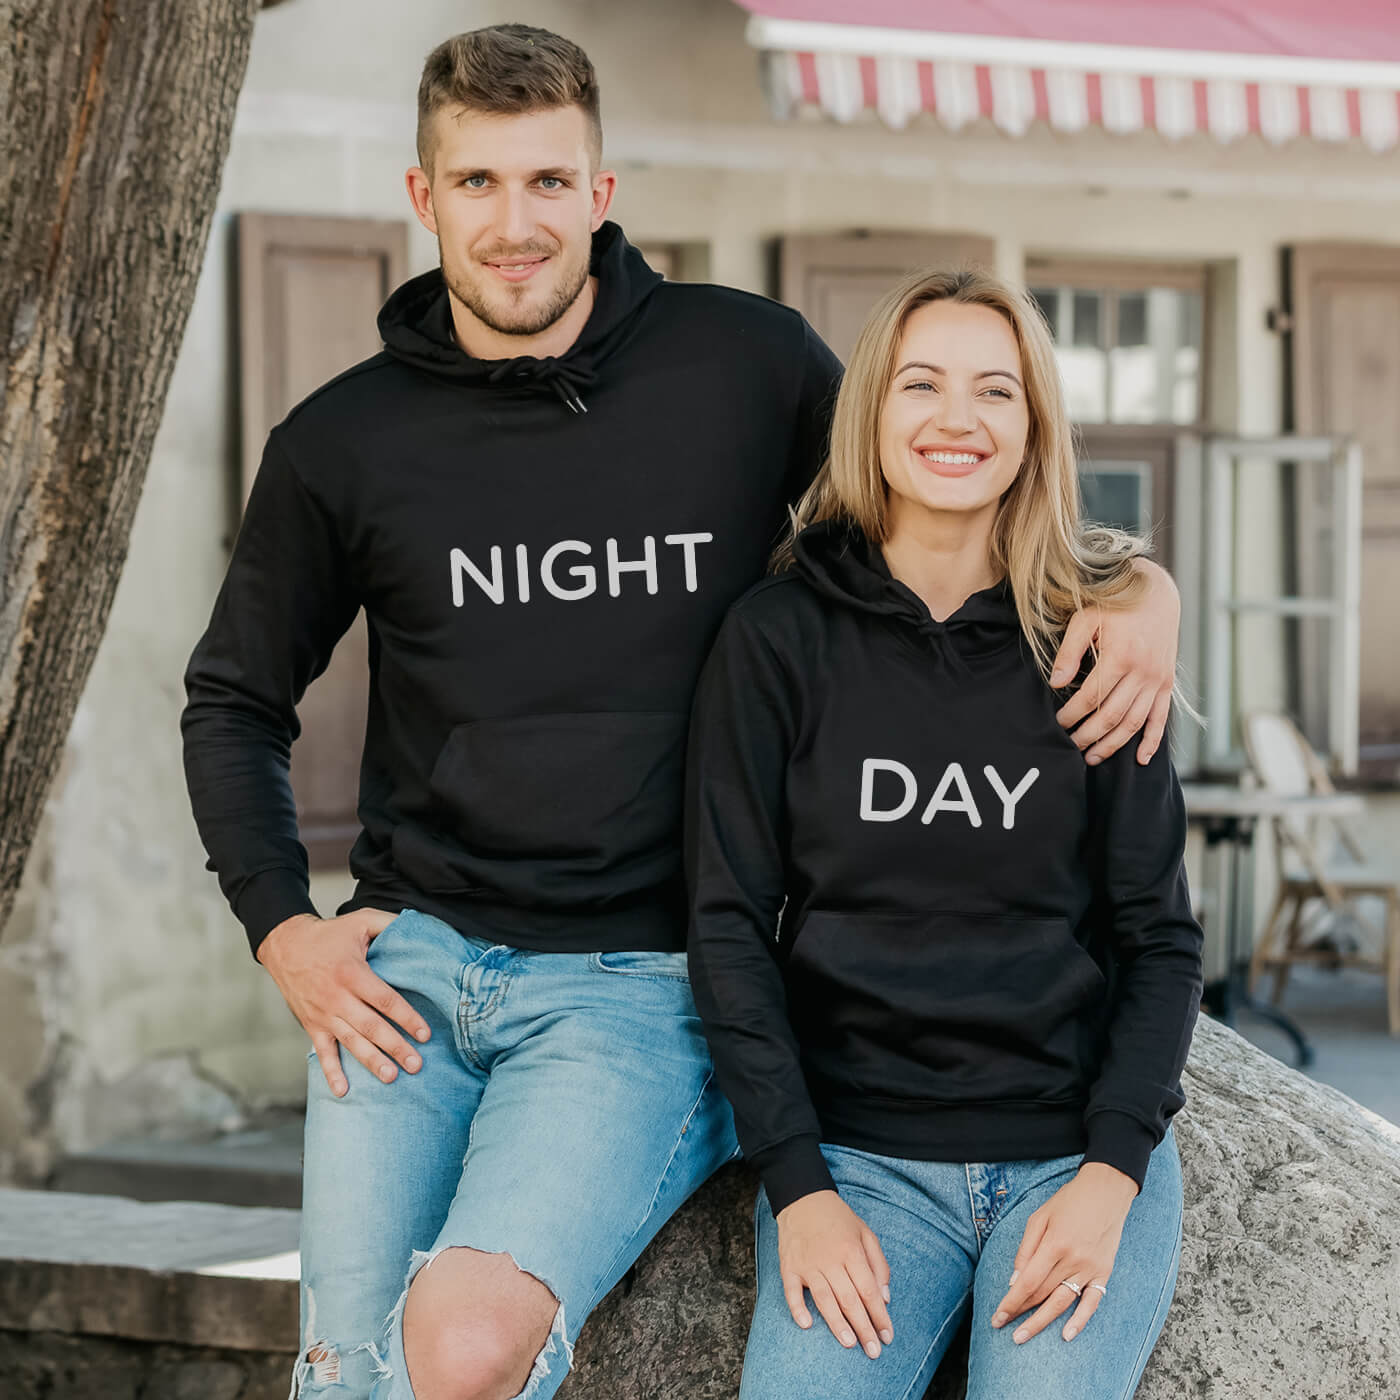 https://vivamake.com/wp-content/uploads/2020/11/black-couple-hoodies-with-print-day-and-night.jpg